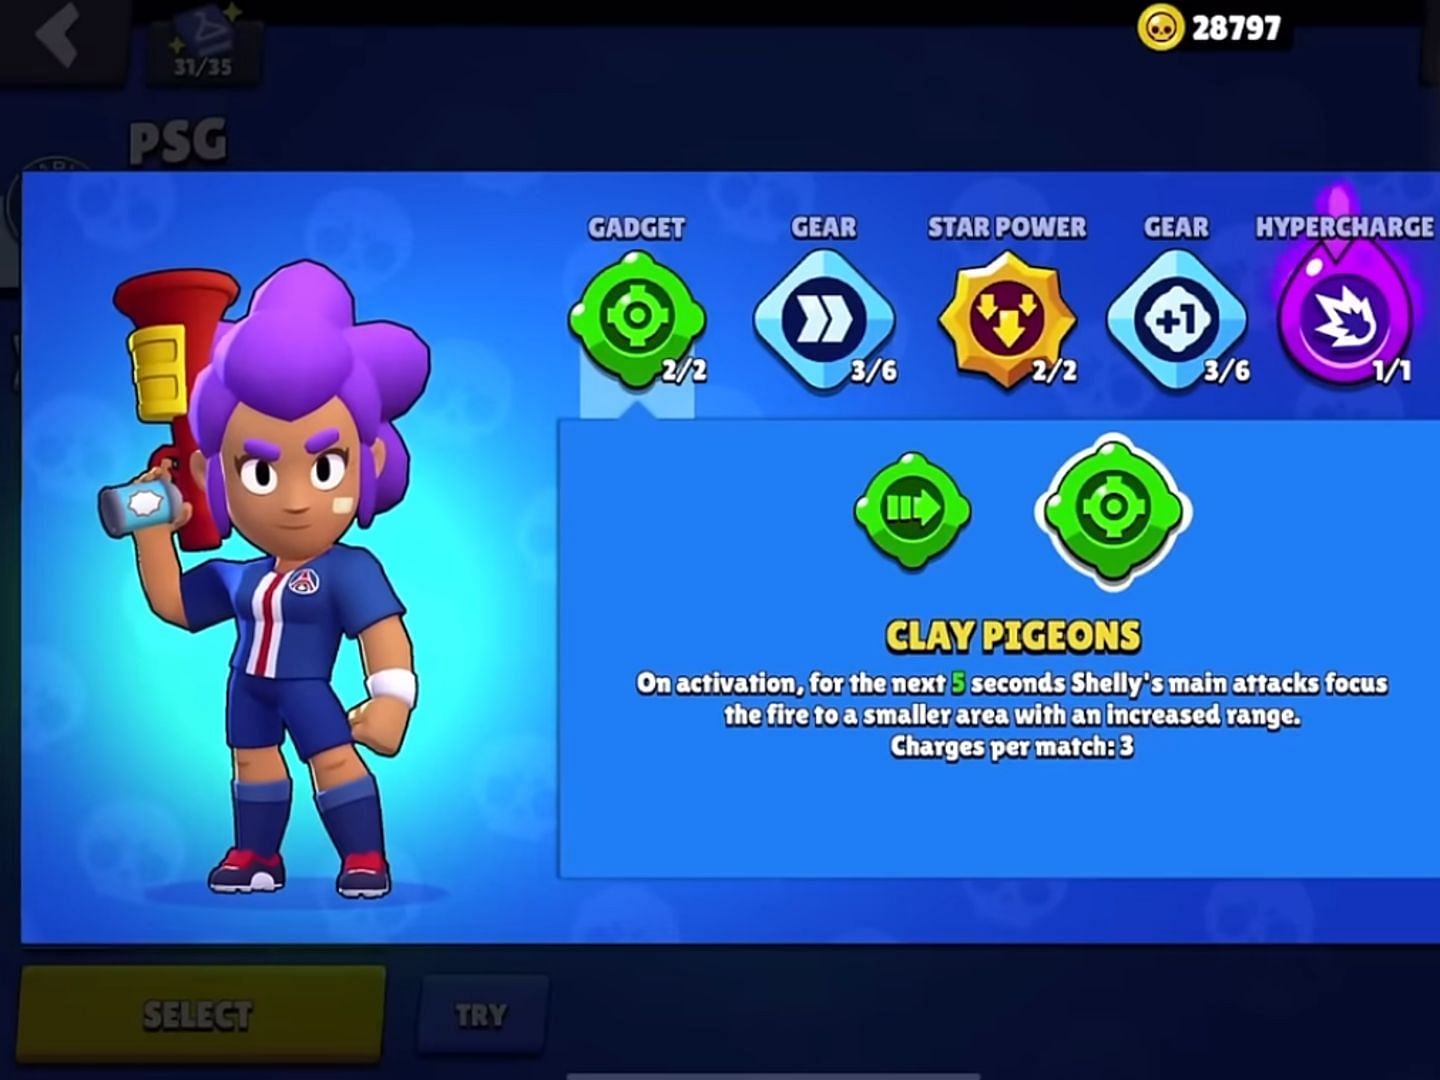 Clay Pigeons Gadget improves Shelly&#039;s effectiveness on the battlefield (Image via Supercell)